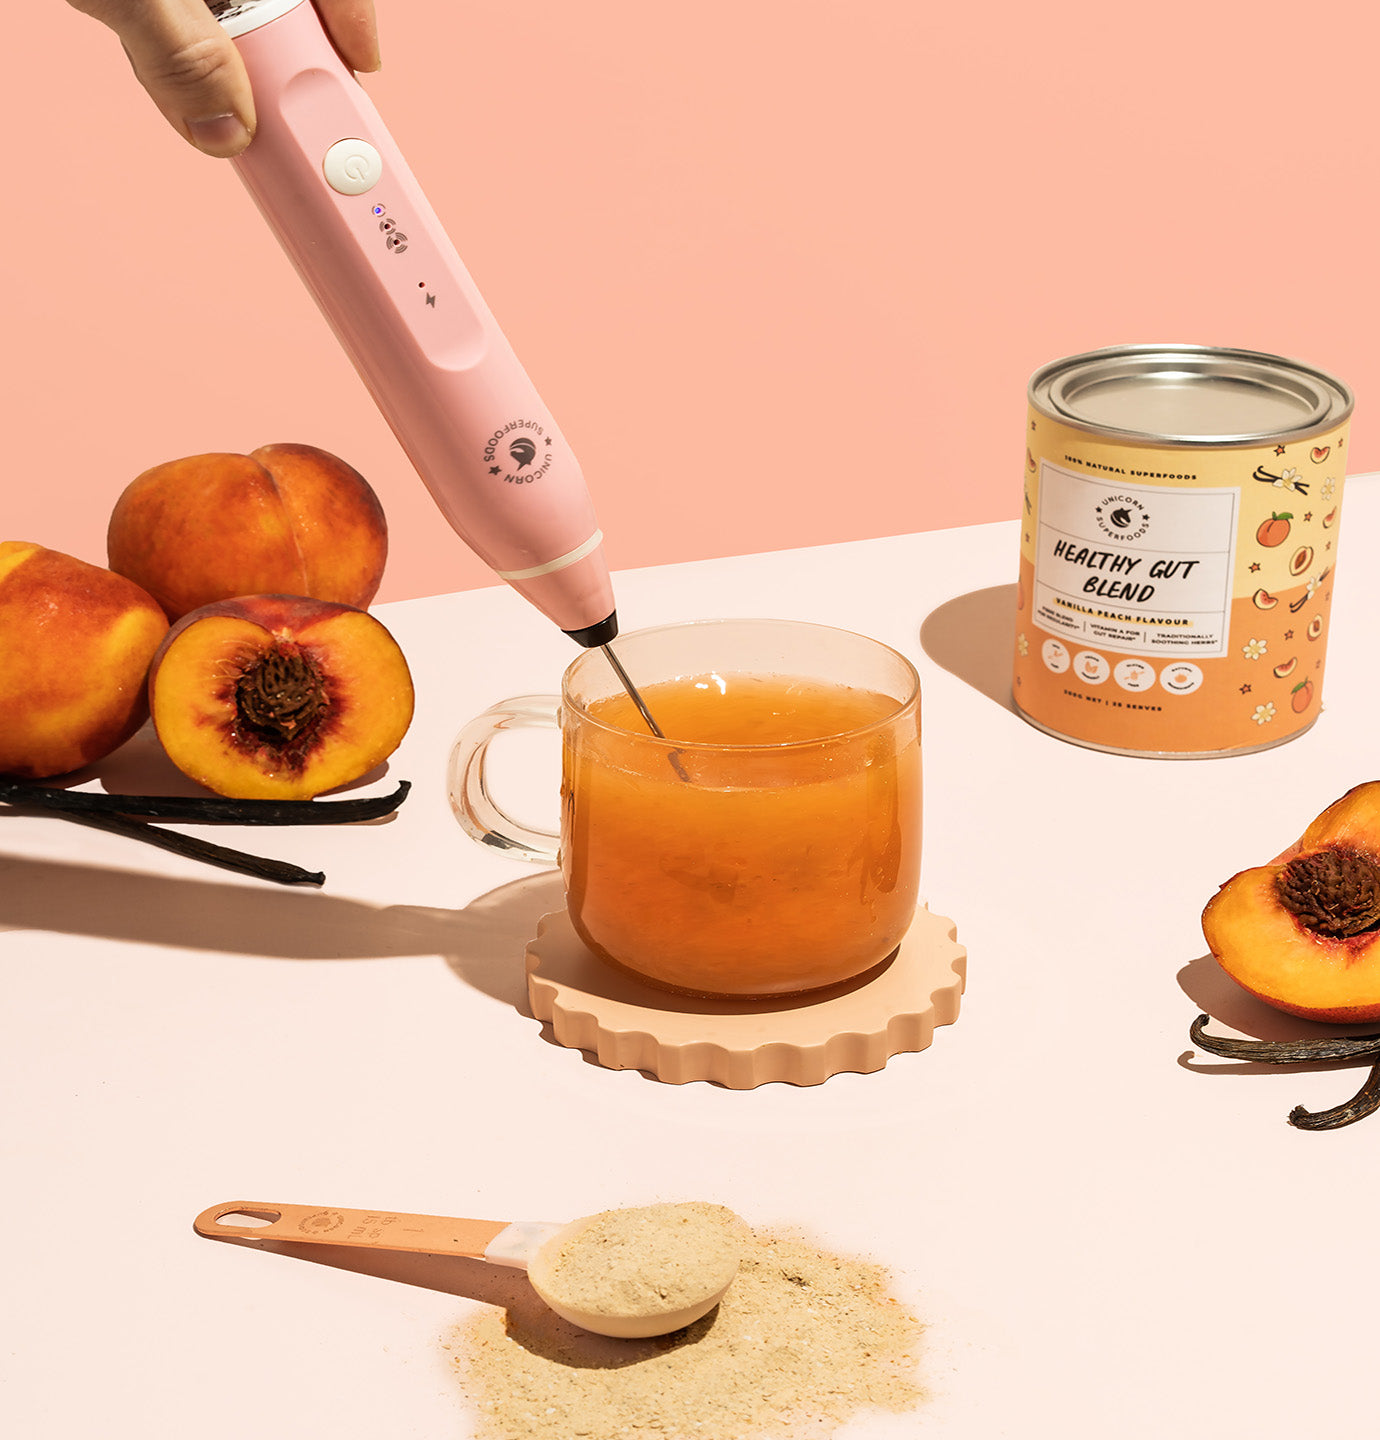 Peach Street Handheld Milk Frother Review - The Perfect Froth in